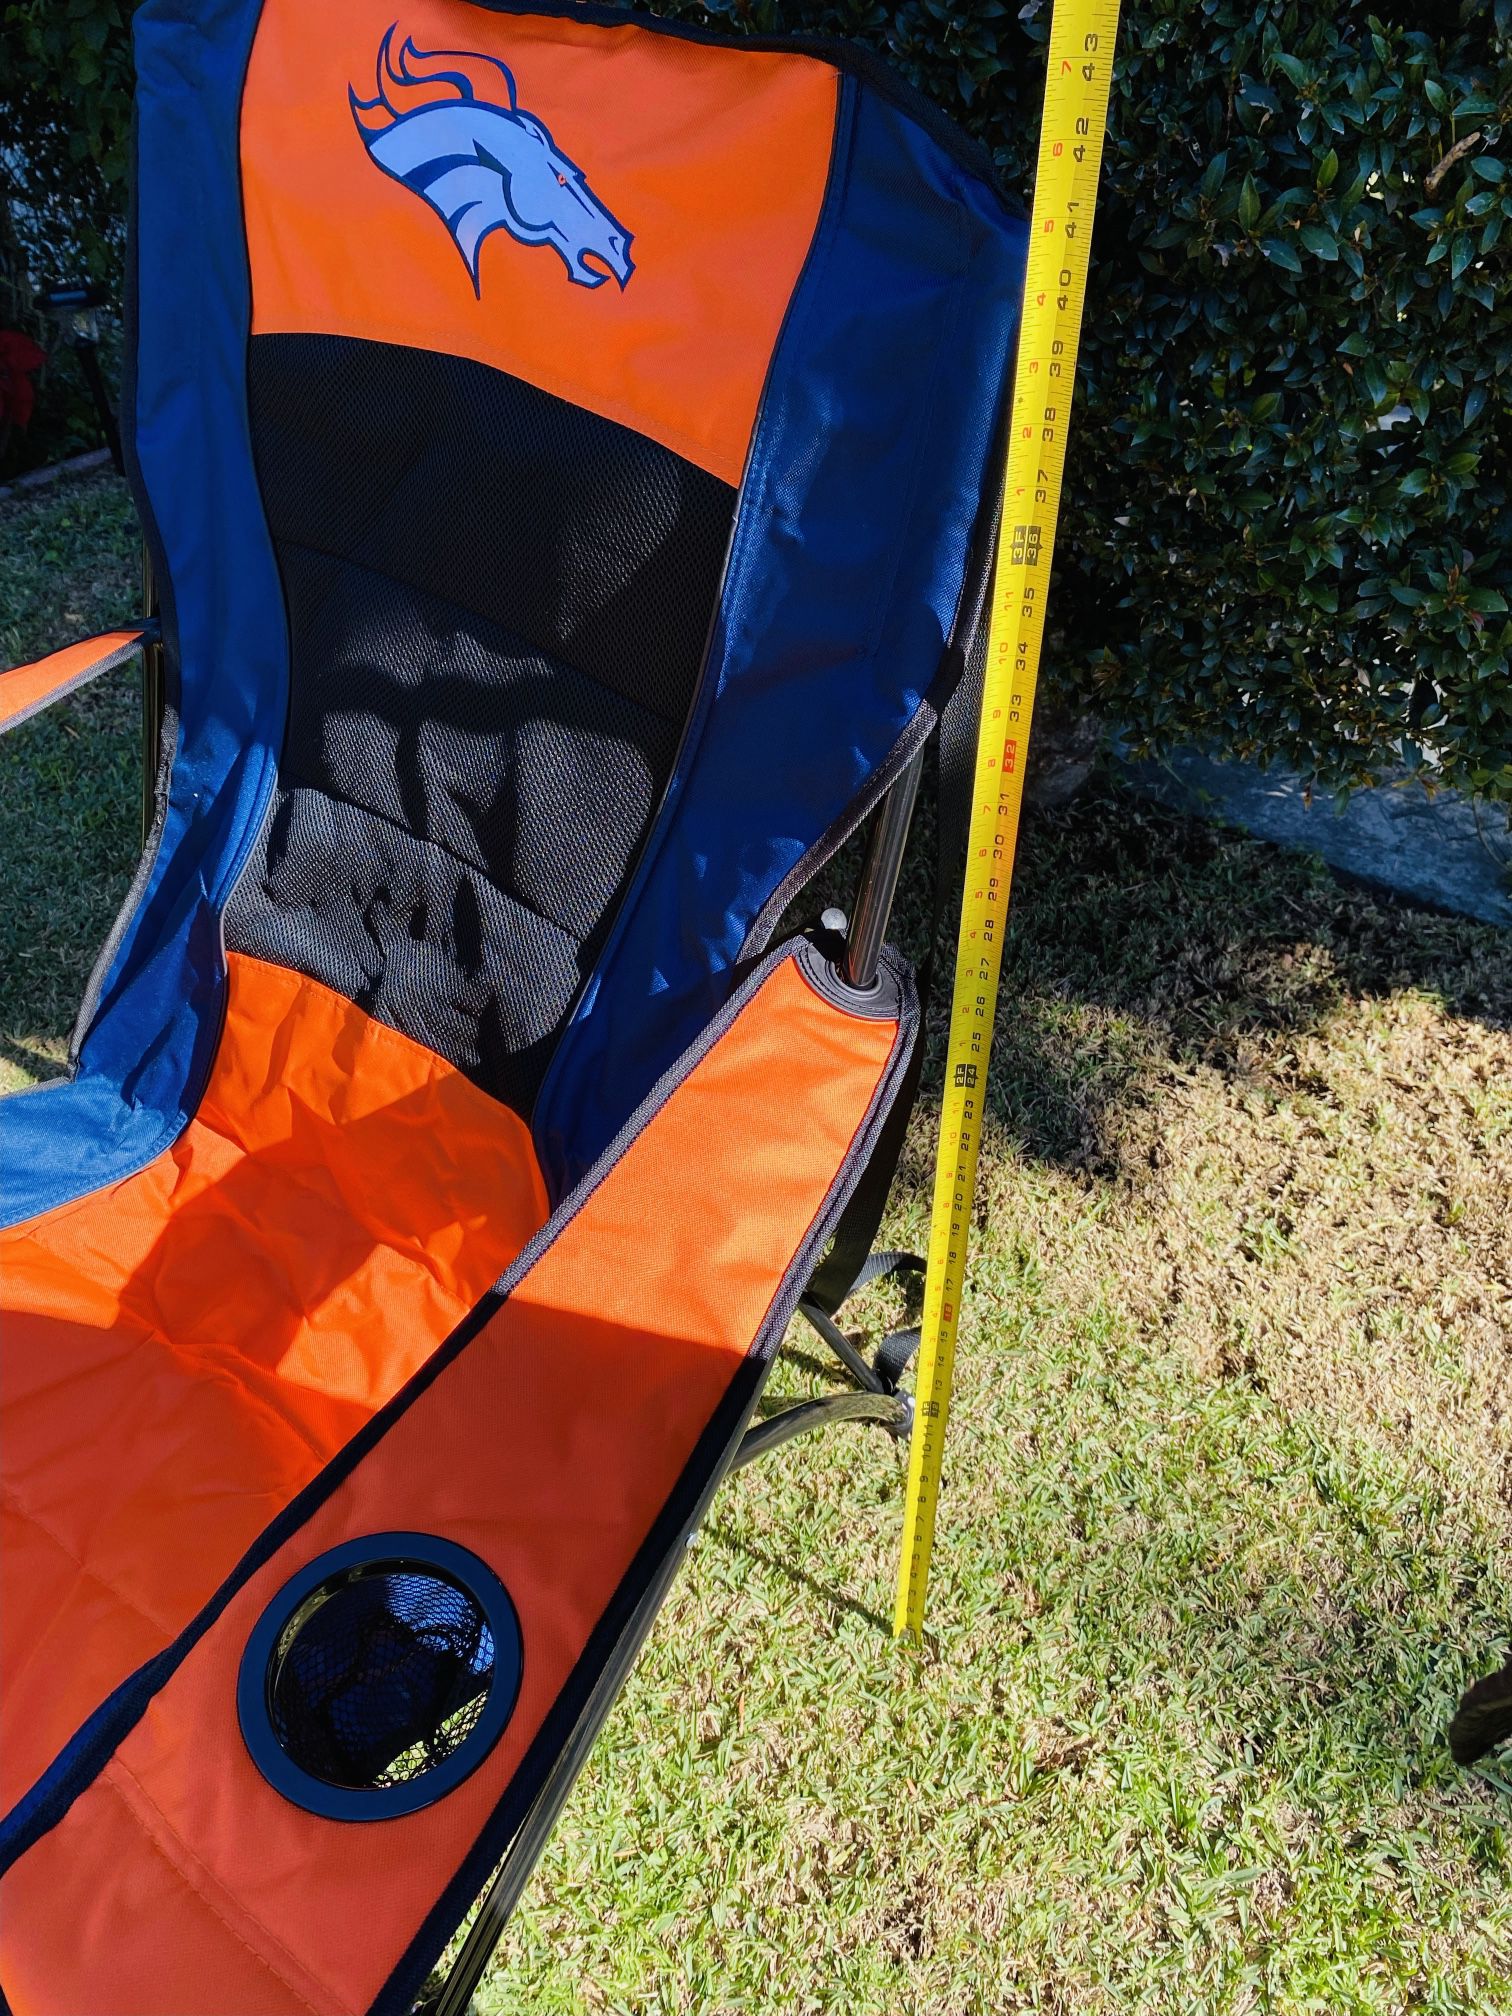 NFL OVERSIZE HIGH BACK CHAIR COMFORTABLE FOR OUTDOOR OR INDOOR NEW ️CHAIR  (COMPARE TO COSTCO $49.99 + Tax + Membership) Big Saving Big T Deals ️️️  for Sale in Bell Gardens, CA - OfferUp